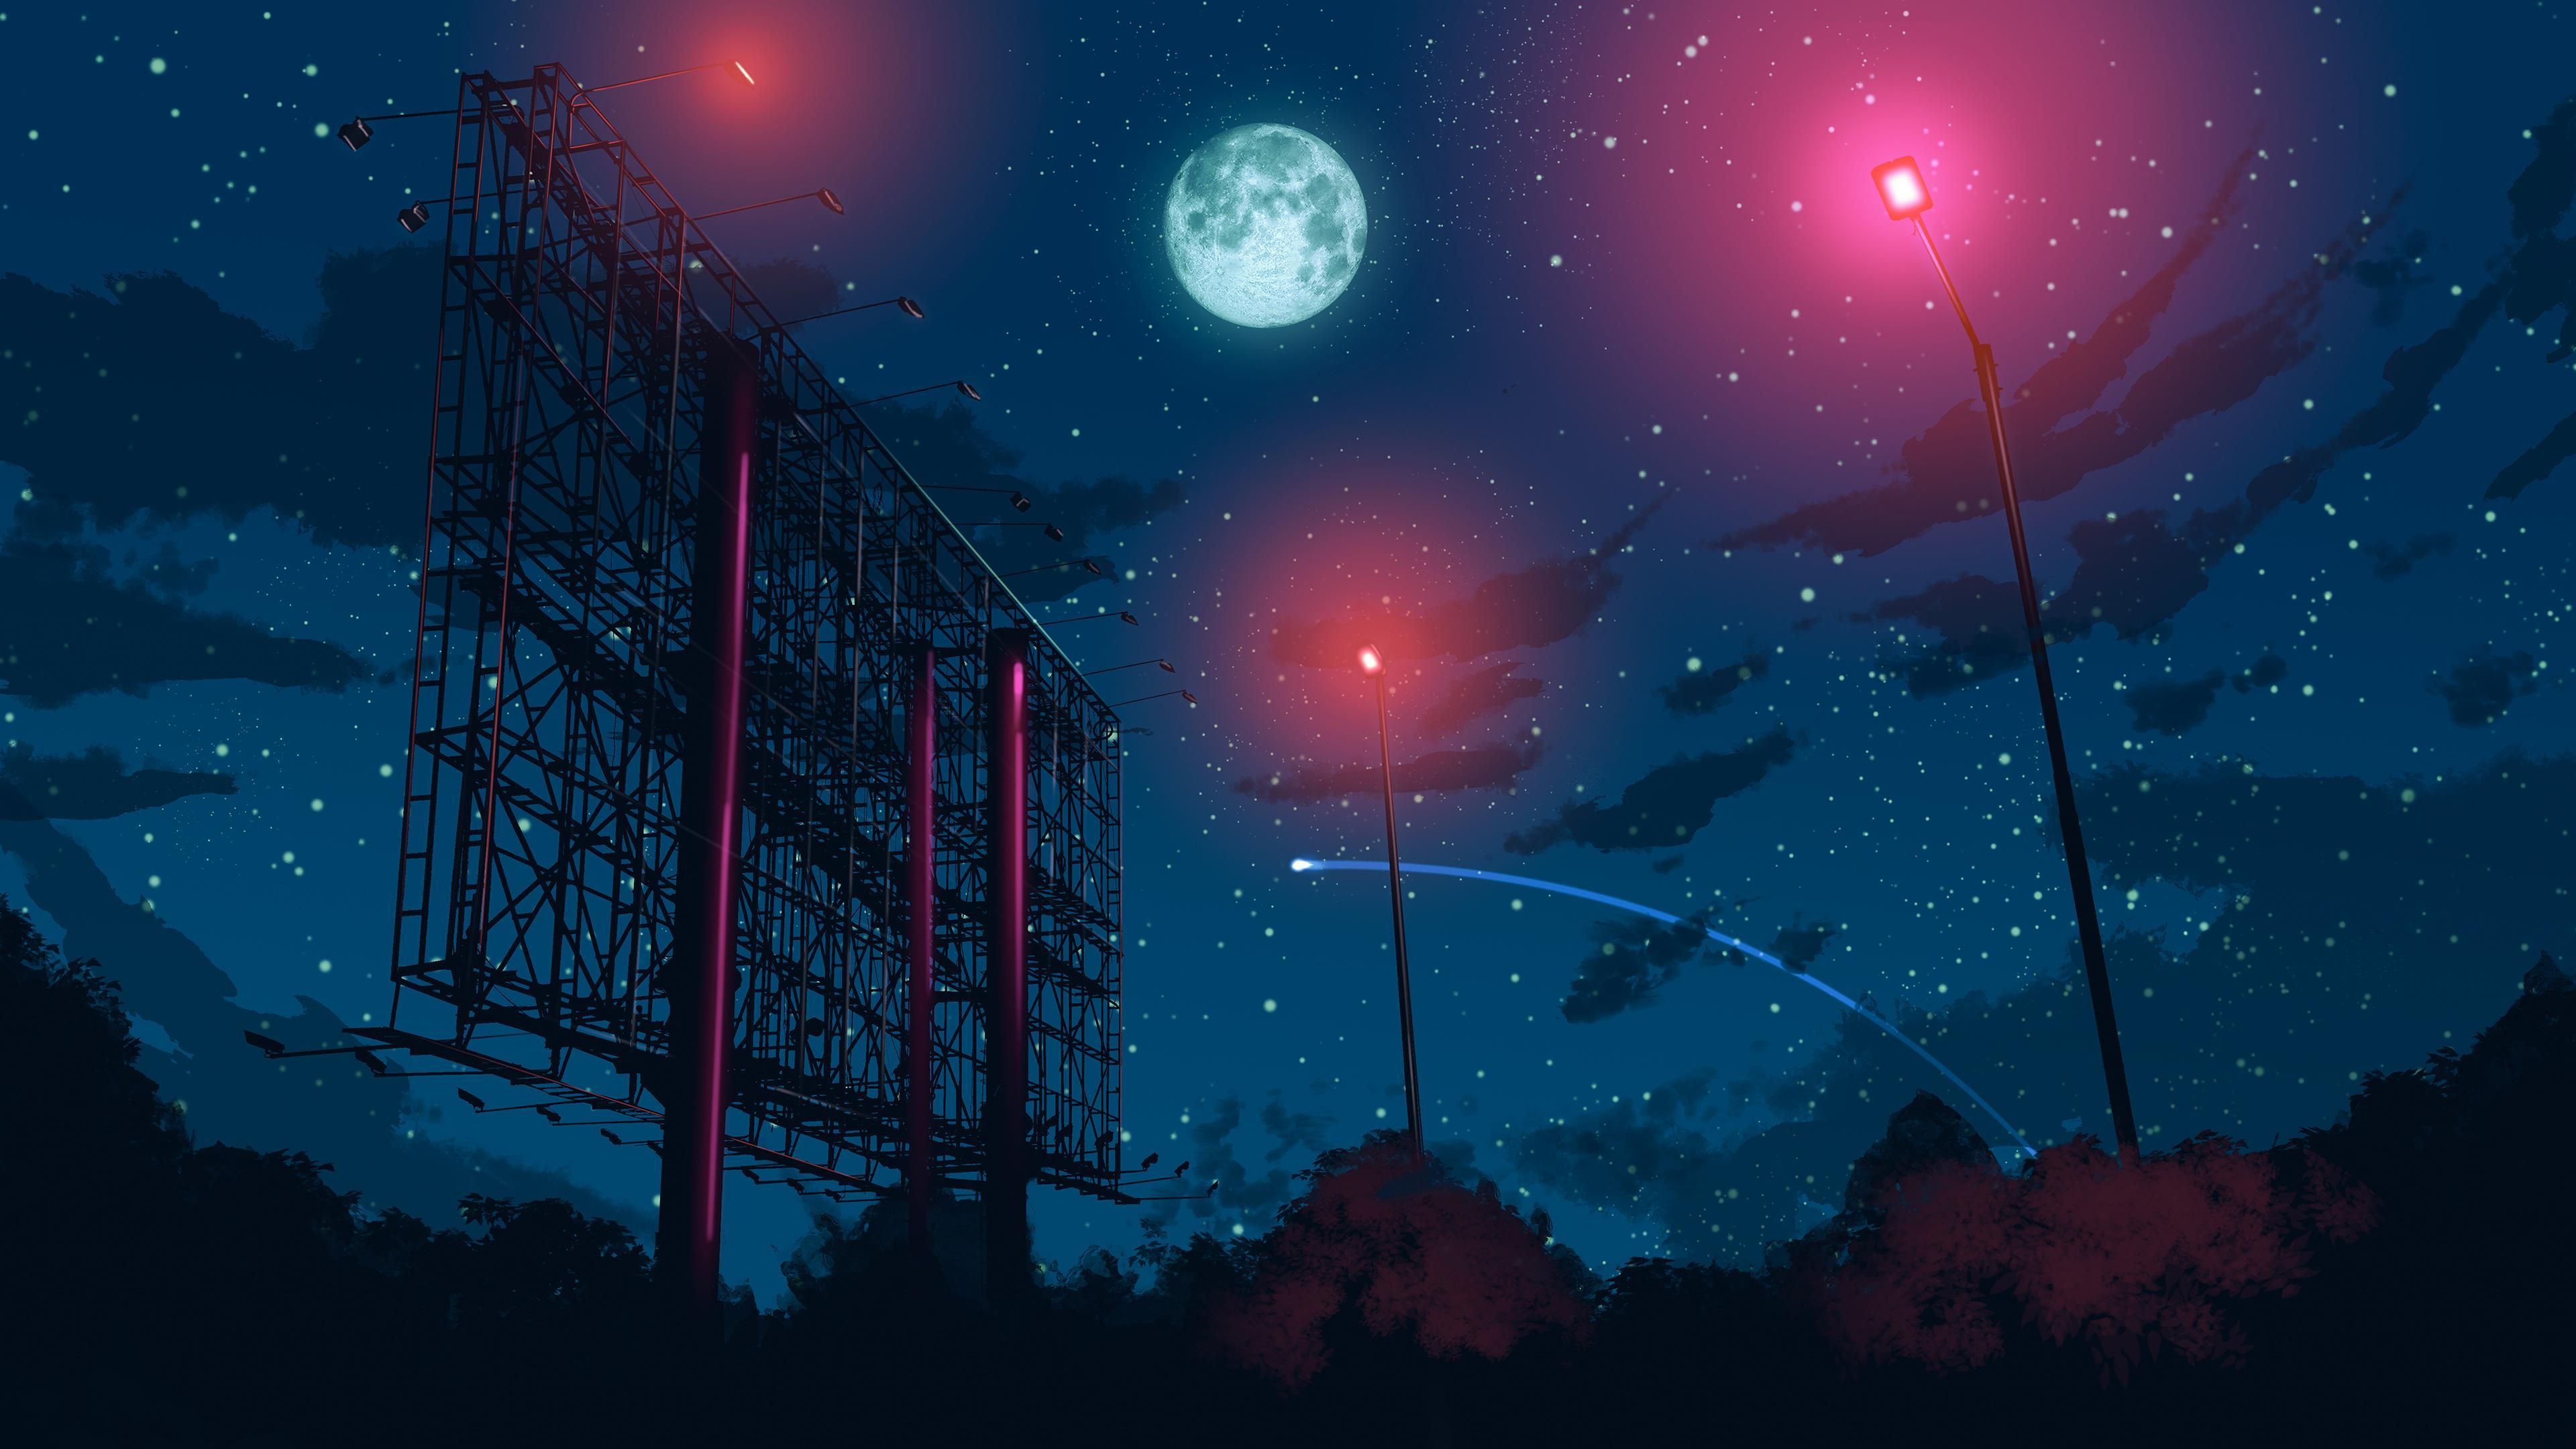 Anime Style Night Sky [3840x2160] (Uncropped 6K Version Link In Comment). Night Sky Wallpaper, Anime Scenery Wallpaper, Sky Aesthetic